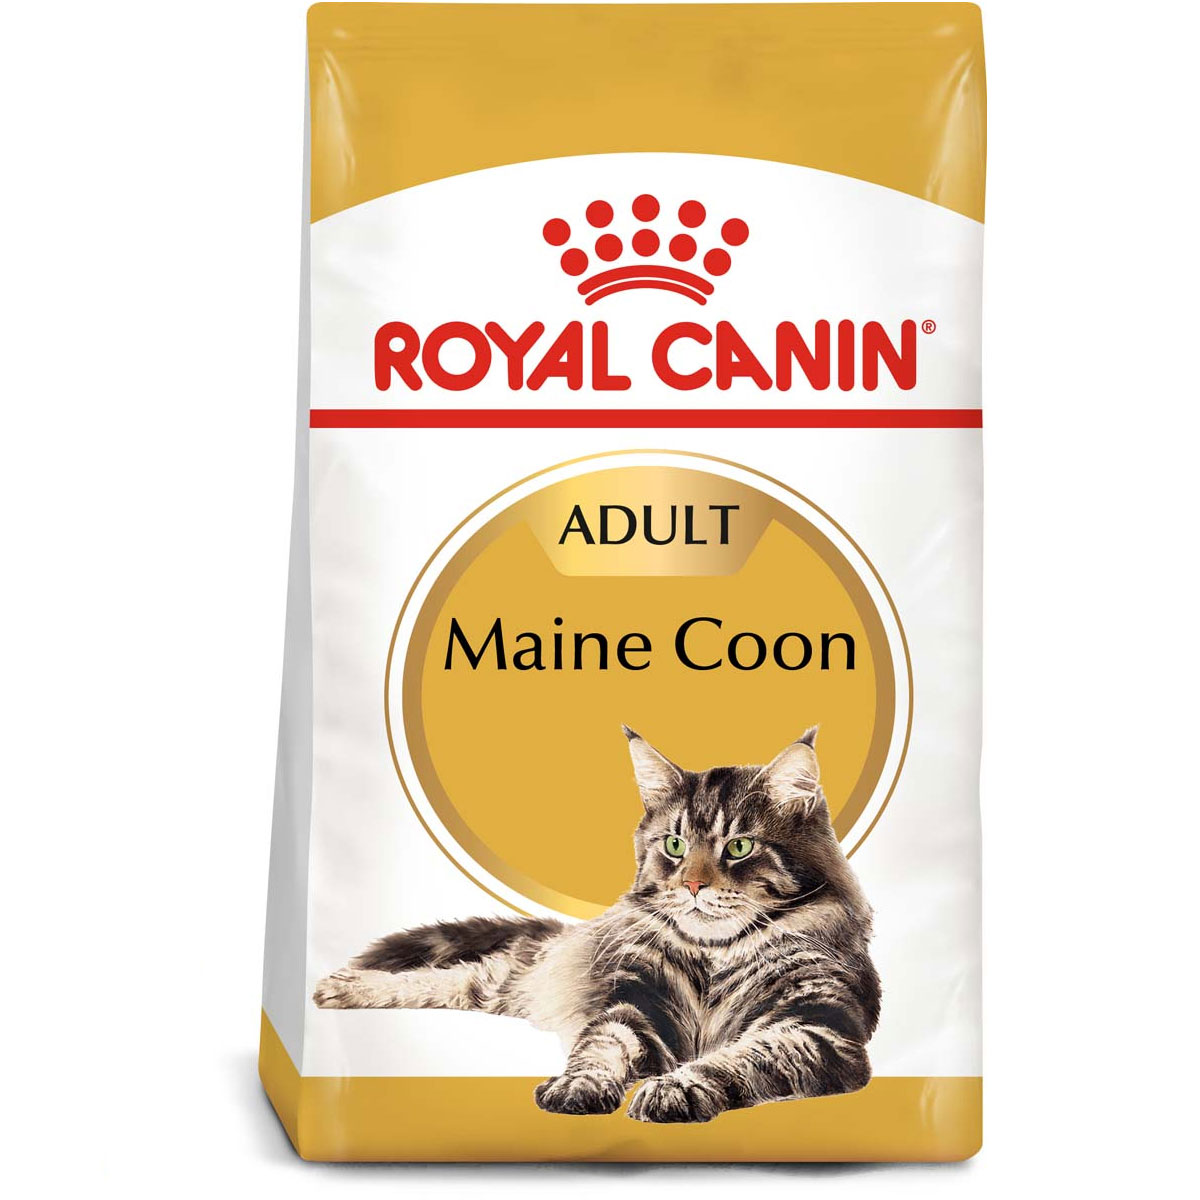 ROYAL CANIN Maine Coon Adult